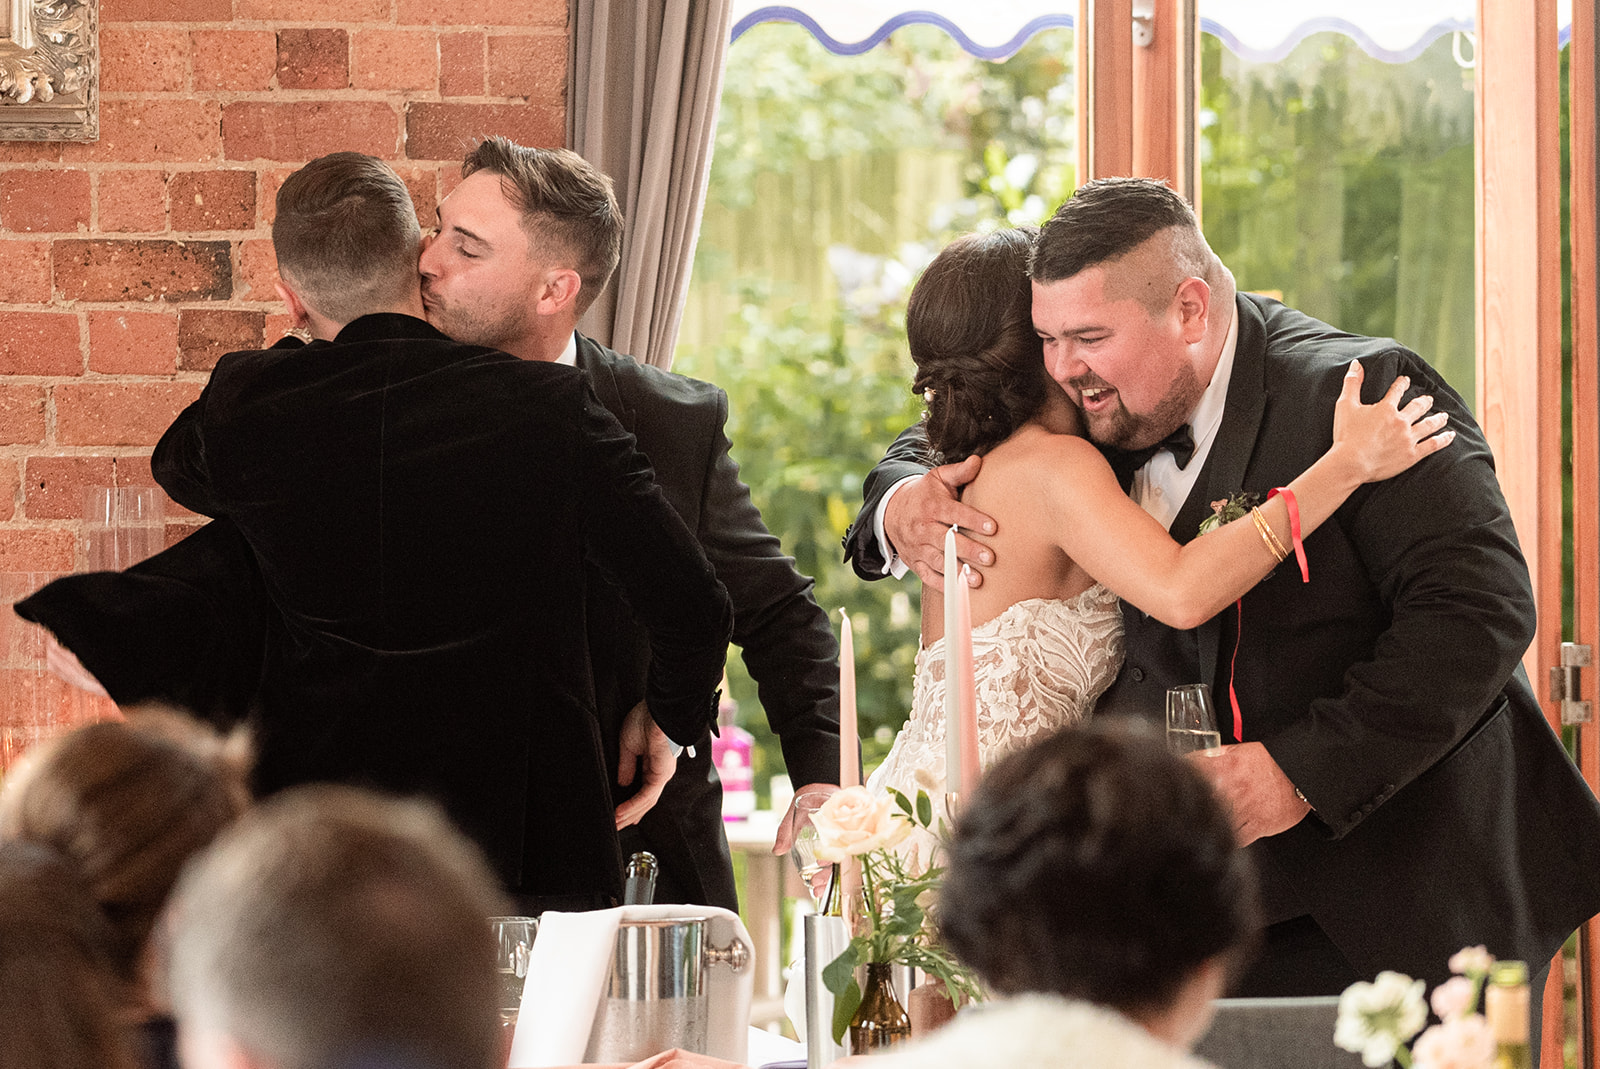 Izzy and Alex's Story | Wedding Photography by Your Story Studios